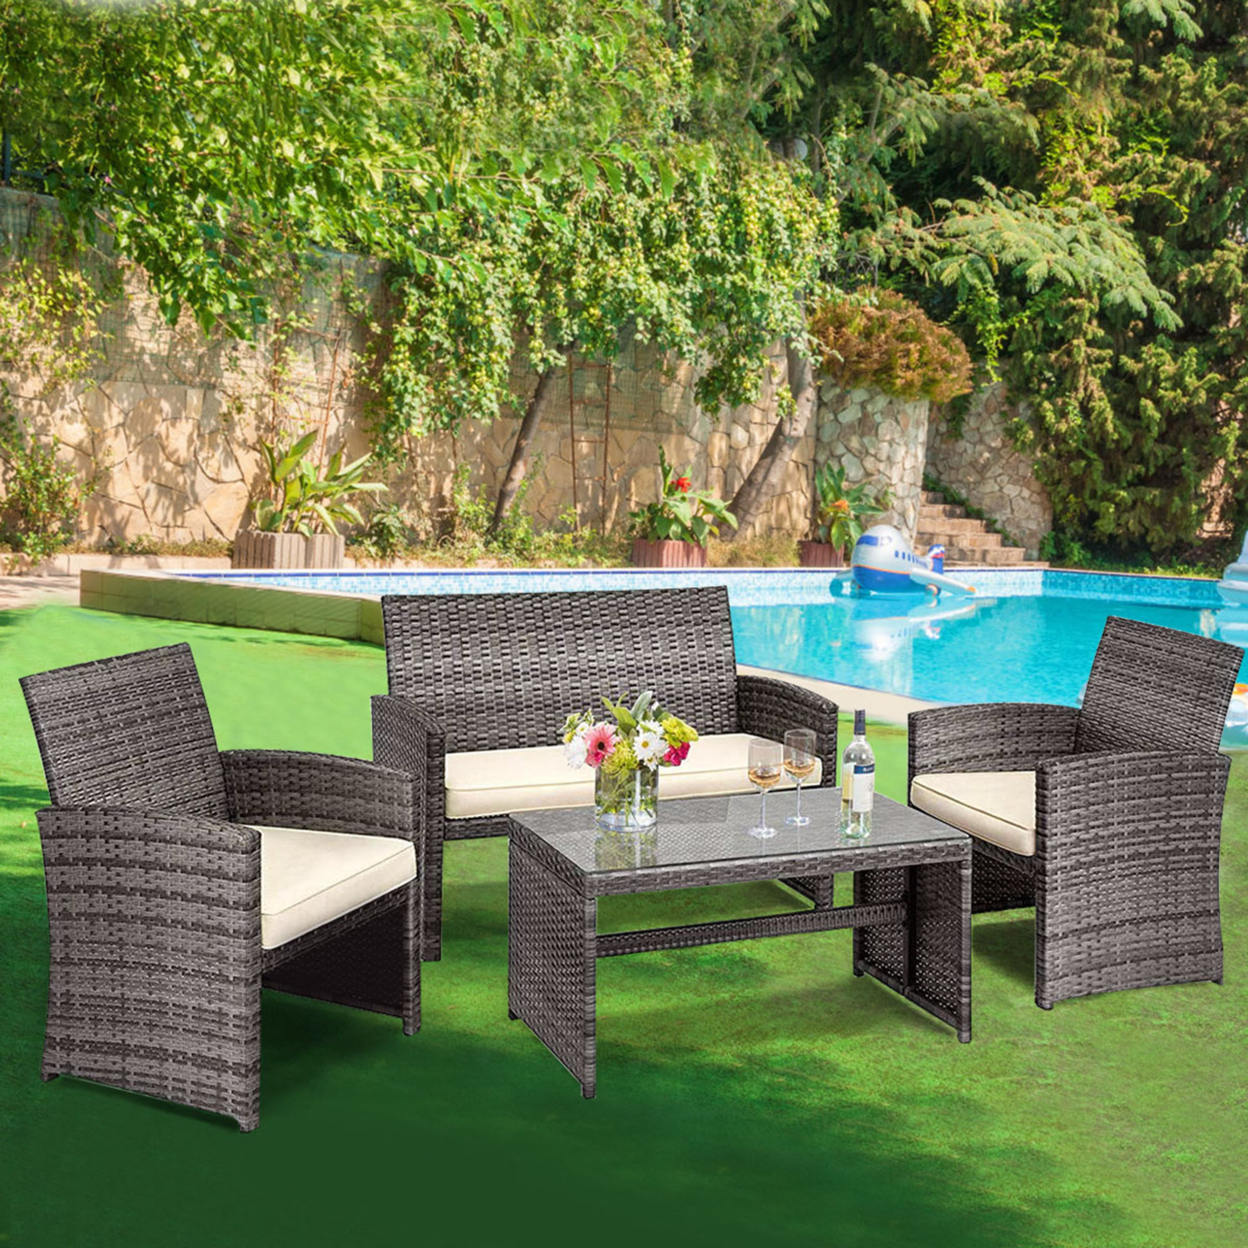 4PCS Patio Outdoor Rattan Furniture Set Chair Loveseat Table Cushioned